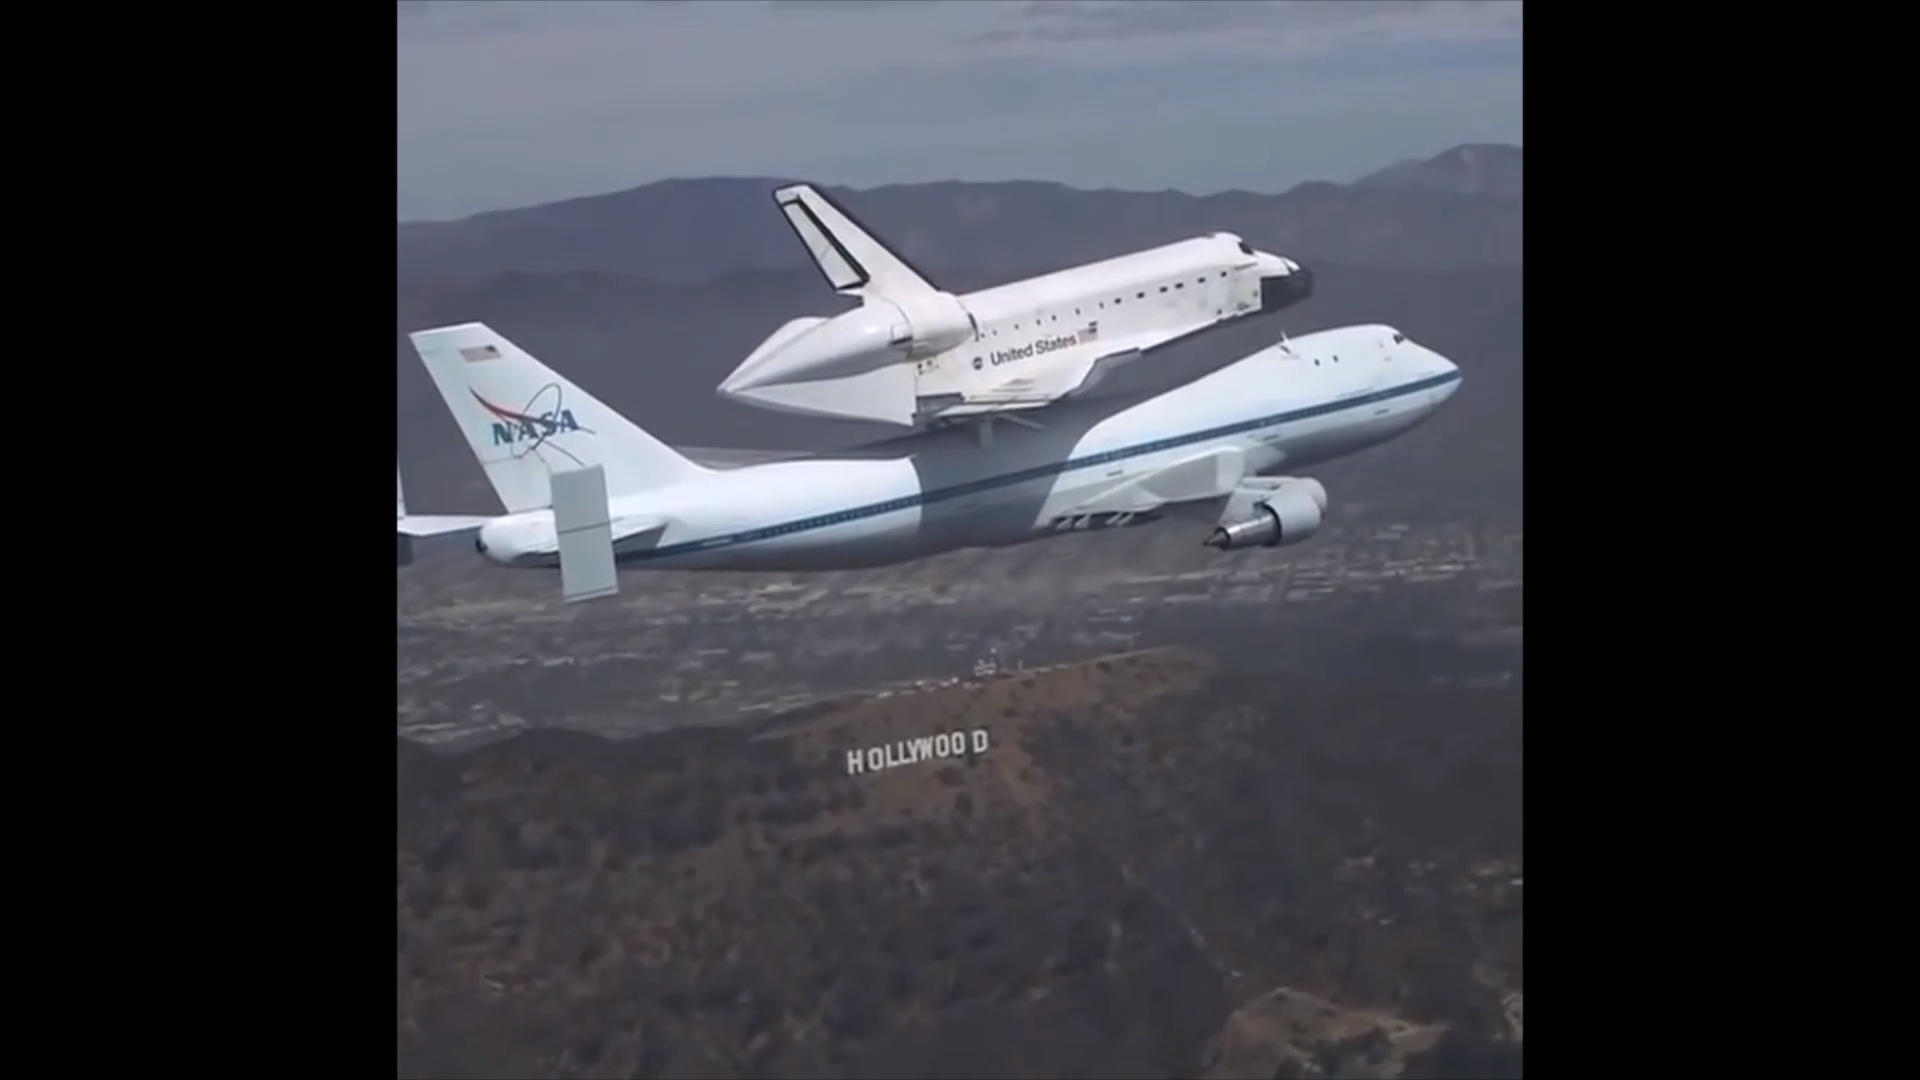 Space shuttle on a Boeing 747 above Hollywood 😊